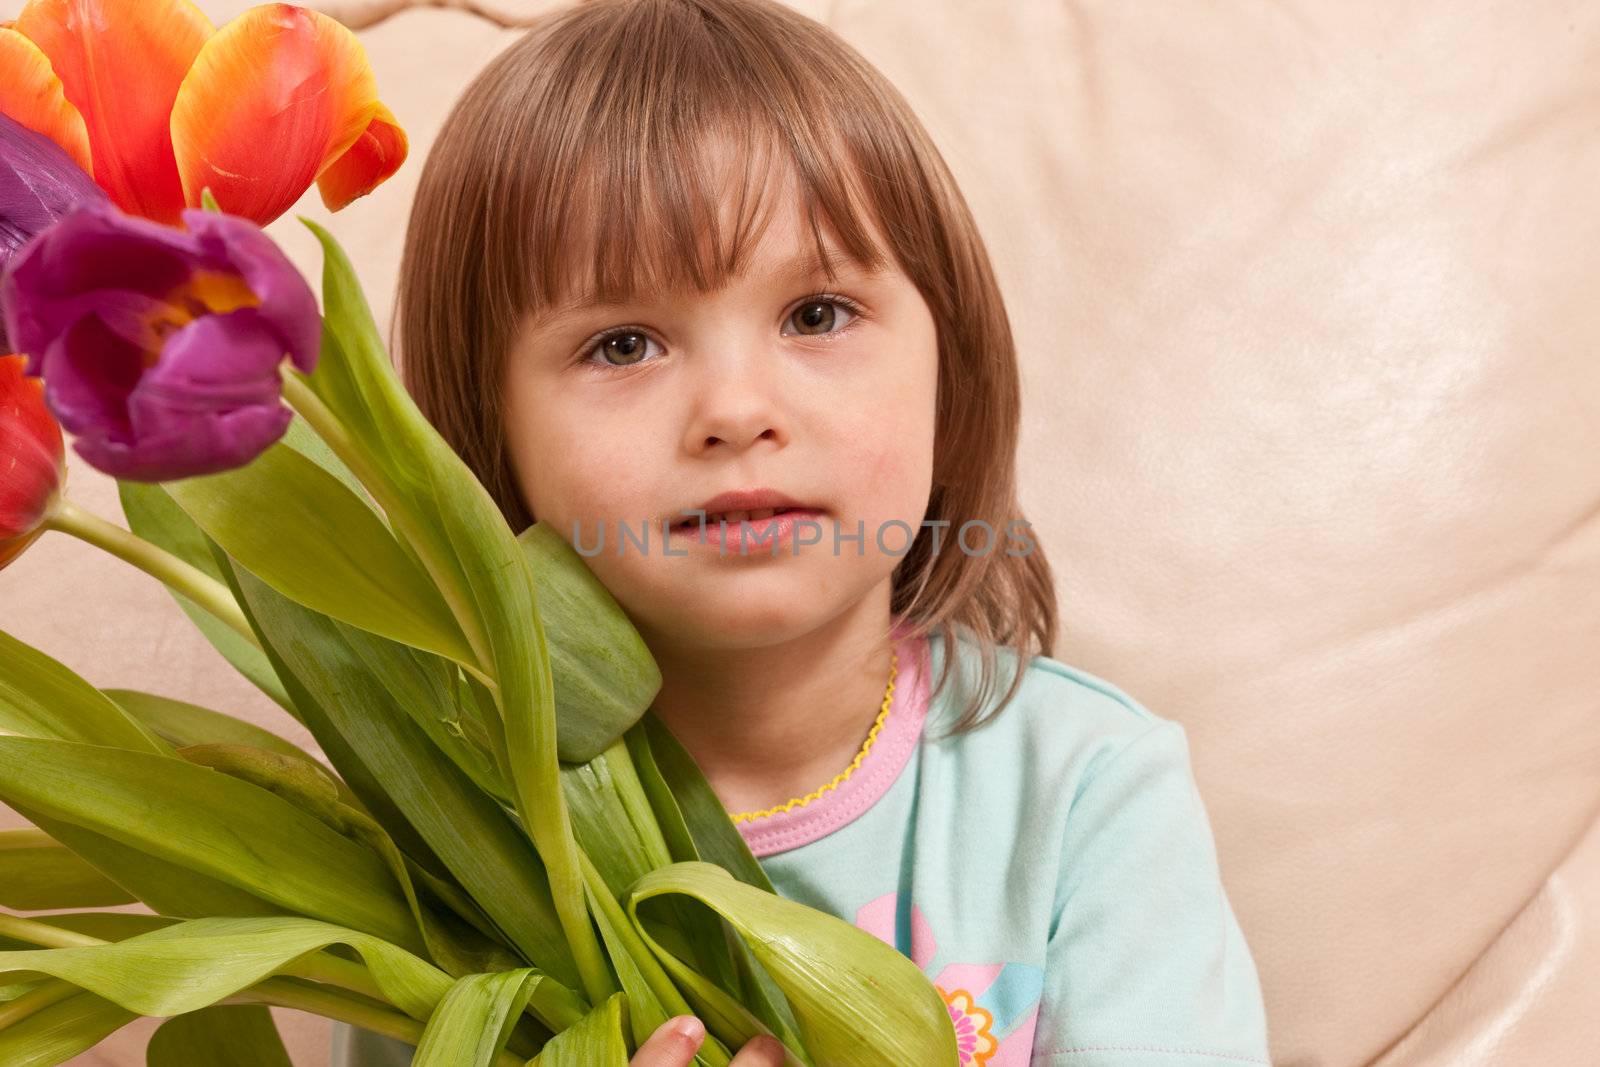 people series: little girl with tulips smile